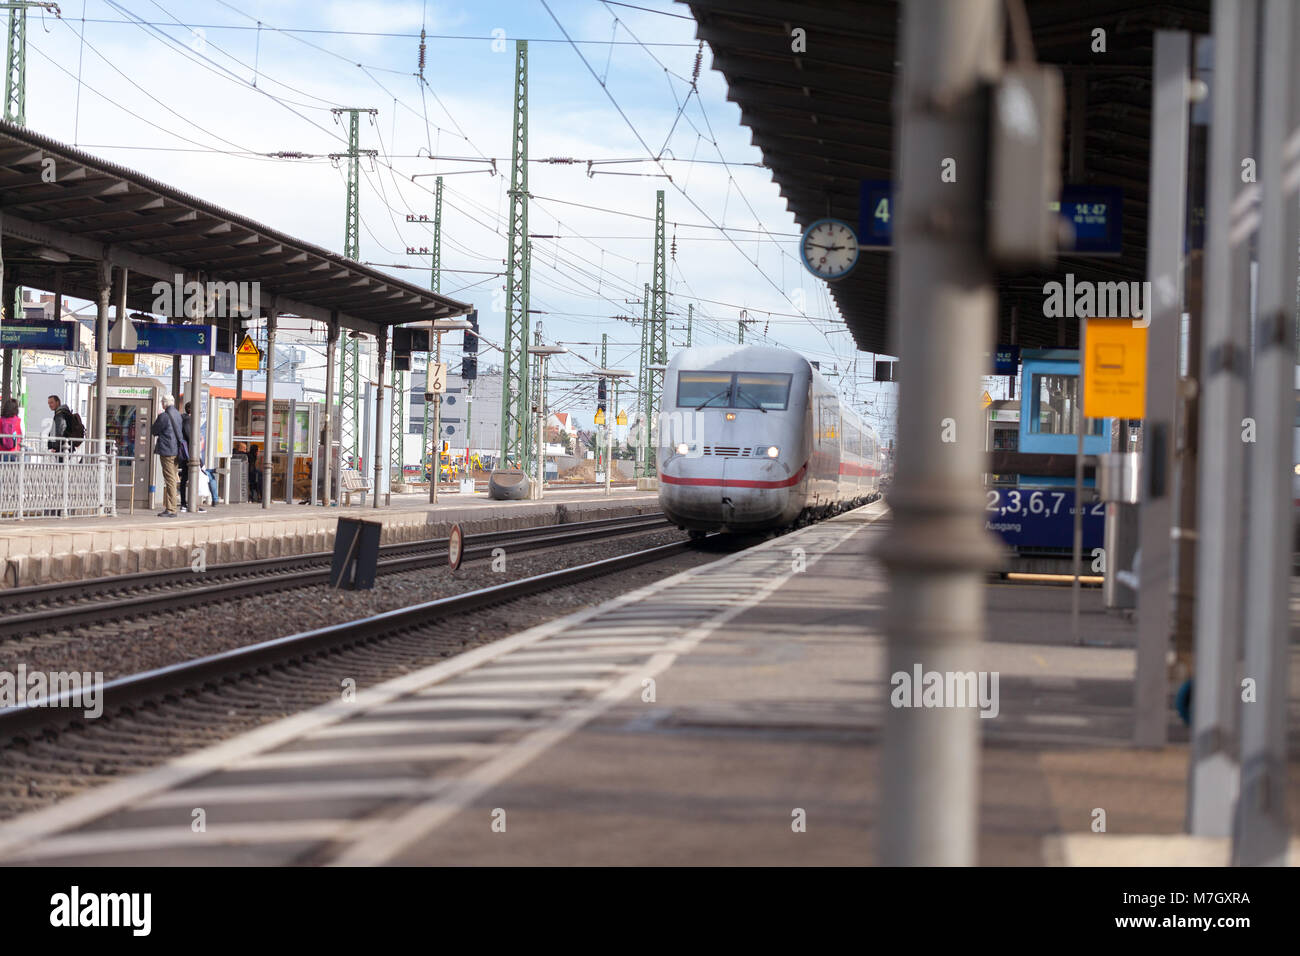 FUERTH / GERMANY - MARCH 11, 2018: ICE 2, intercity-Express train from Deutsche Bahn passes train station fuerth in germany. Stock Photo